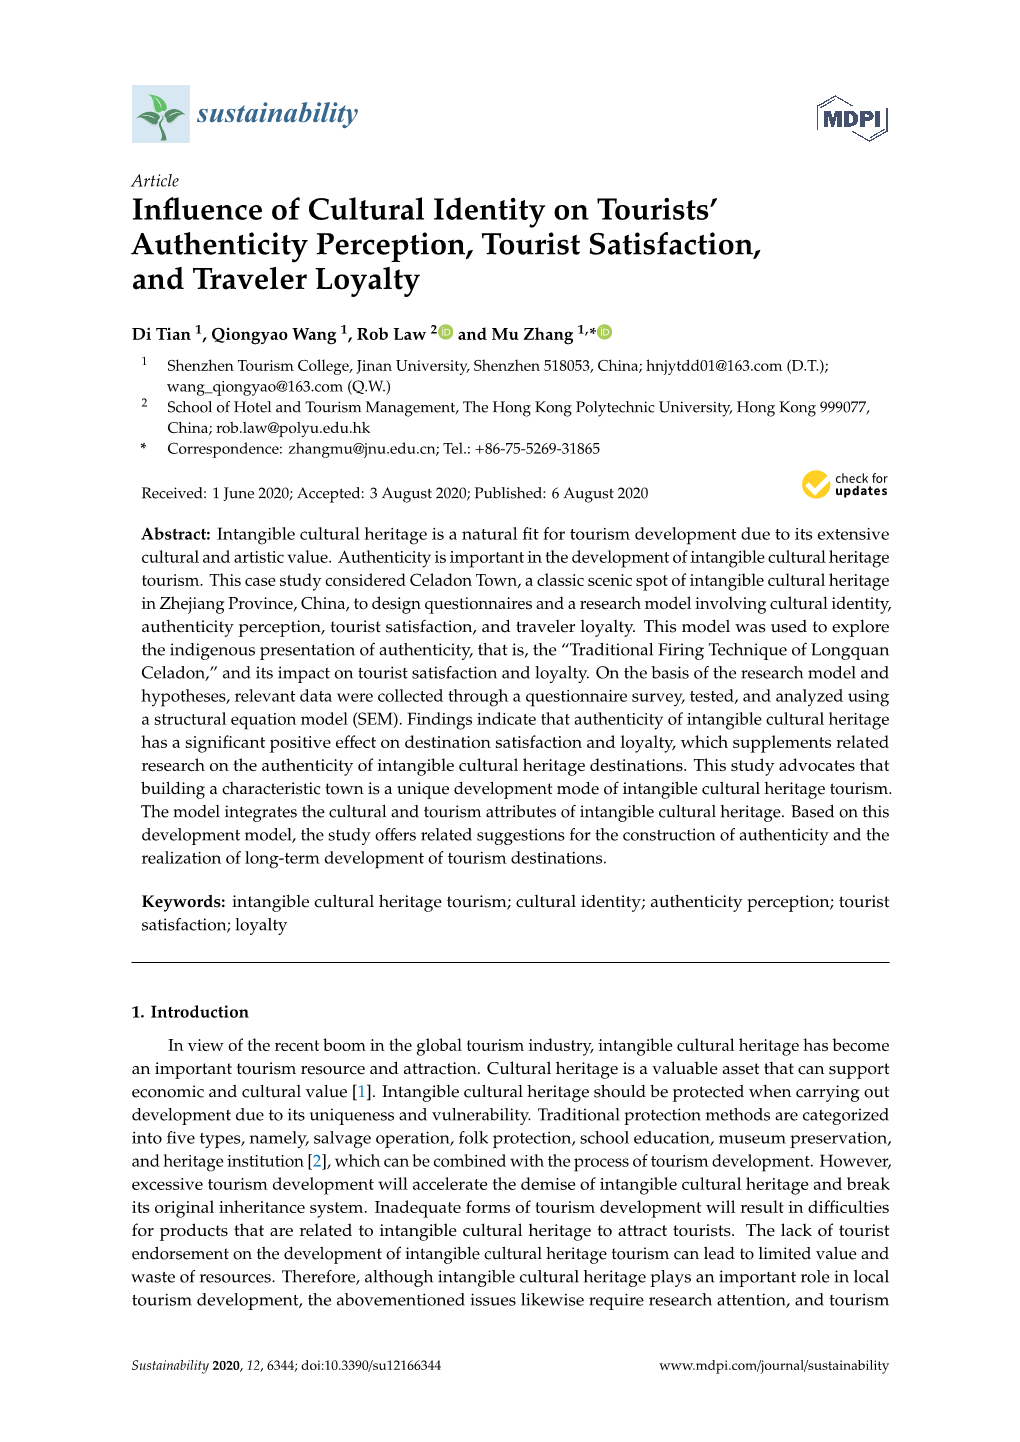 Influence of Cultural Identity on Tourists' Authenticity Perception